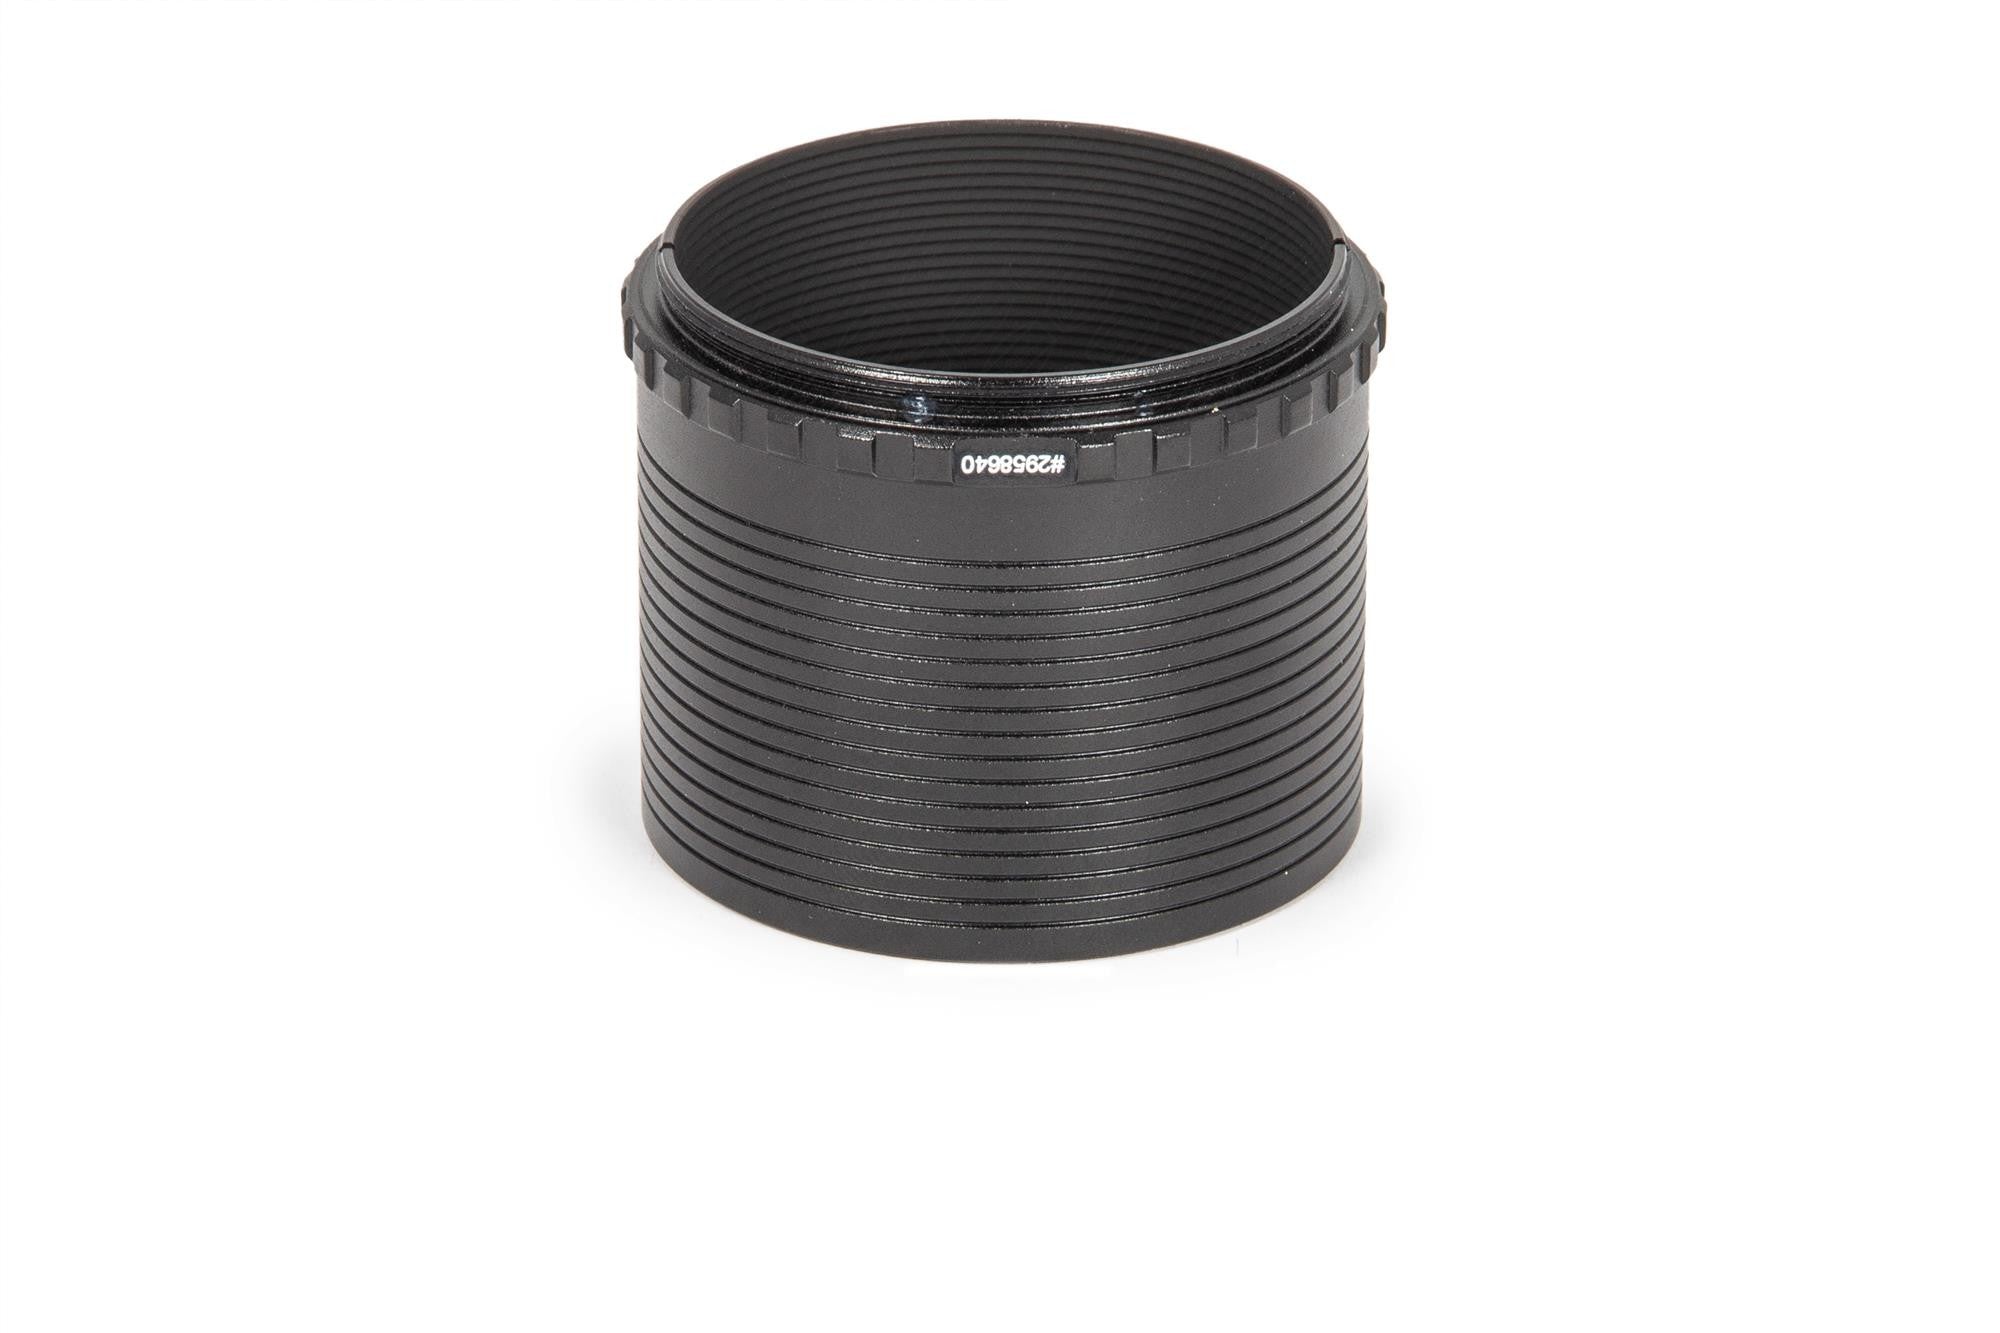 Baader Planetarium Accessory Baader M48 Extension Tube 40 mm   / 2" nose piece with Safety Kerfs